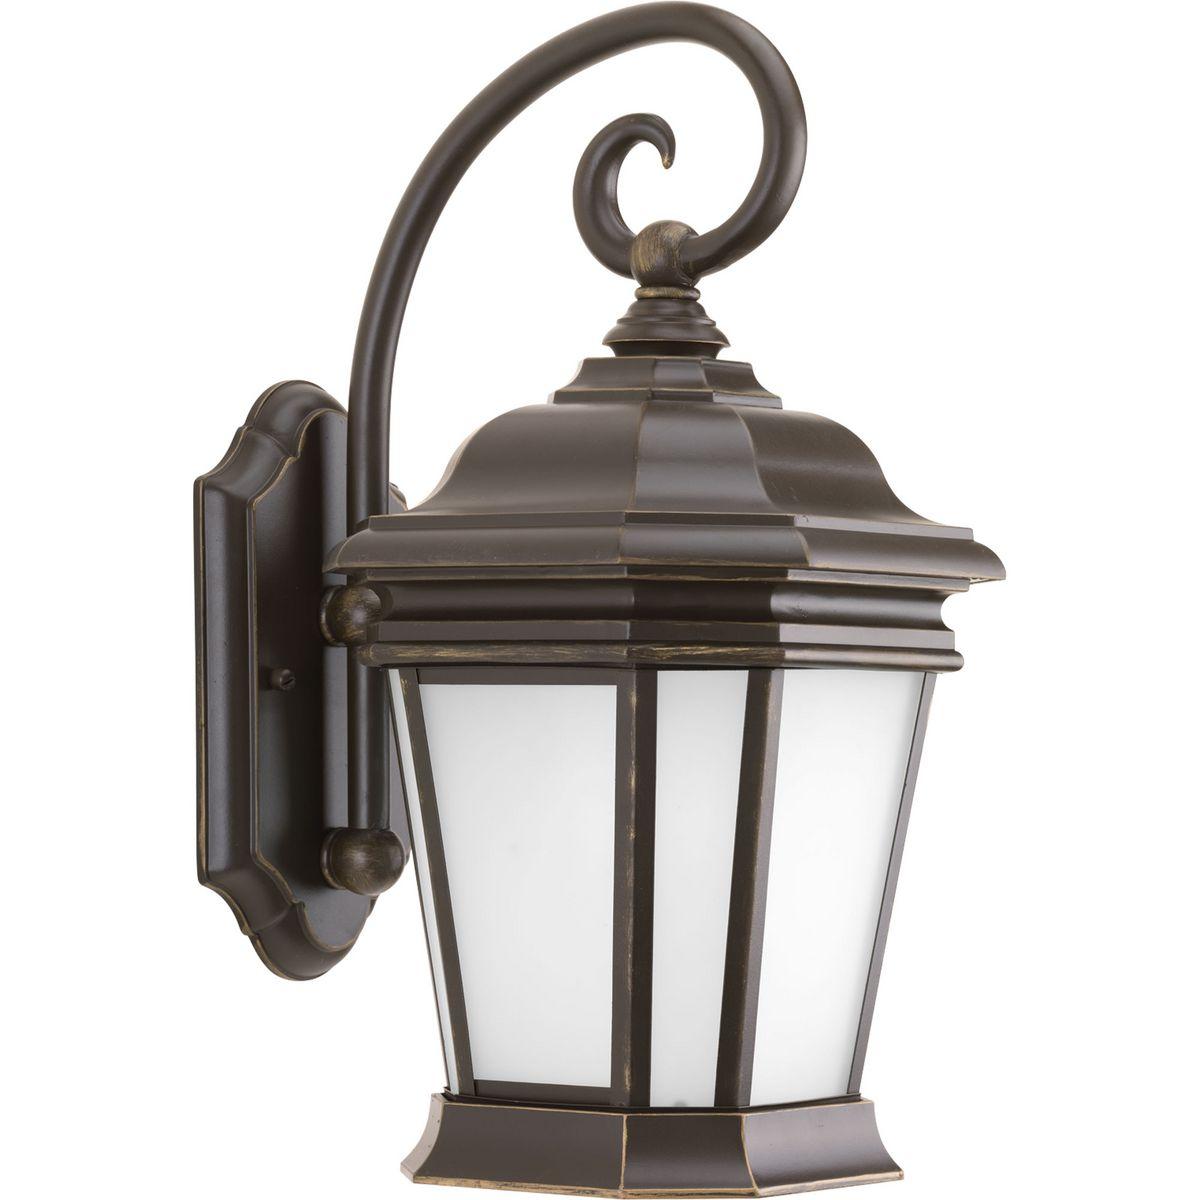 Hubbell P5686-108MD This wall lantern offers updated traditional styling with scroll arm. Etched white glass panes give off a soft glow of light. The panes are housed in a handsome oil-rubbed bronze frame.  ; Etched white glass panes give off a soft glow of light. ; The pane